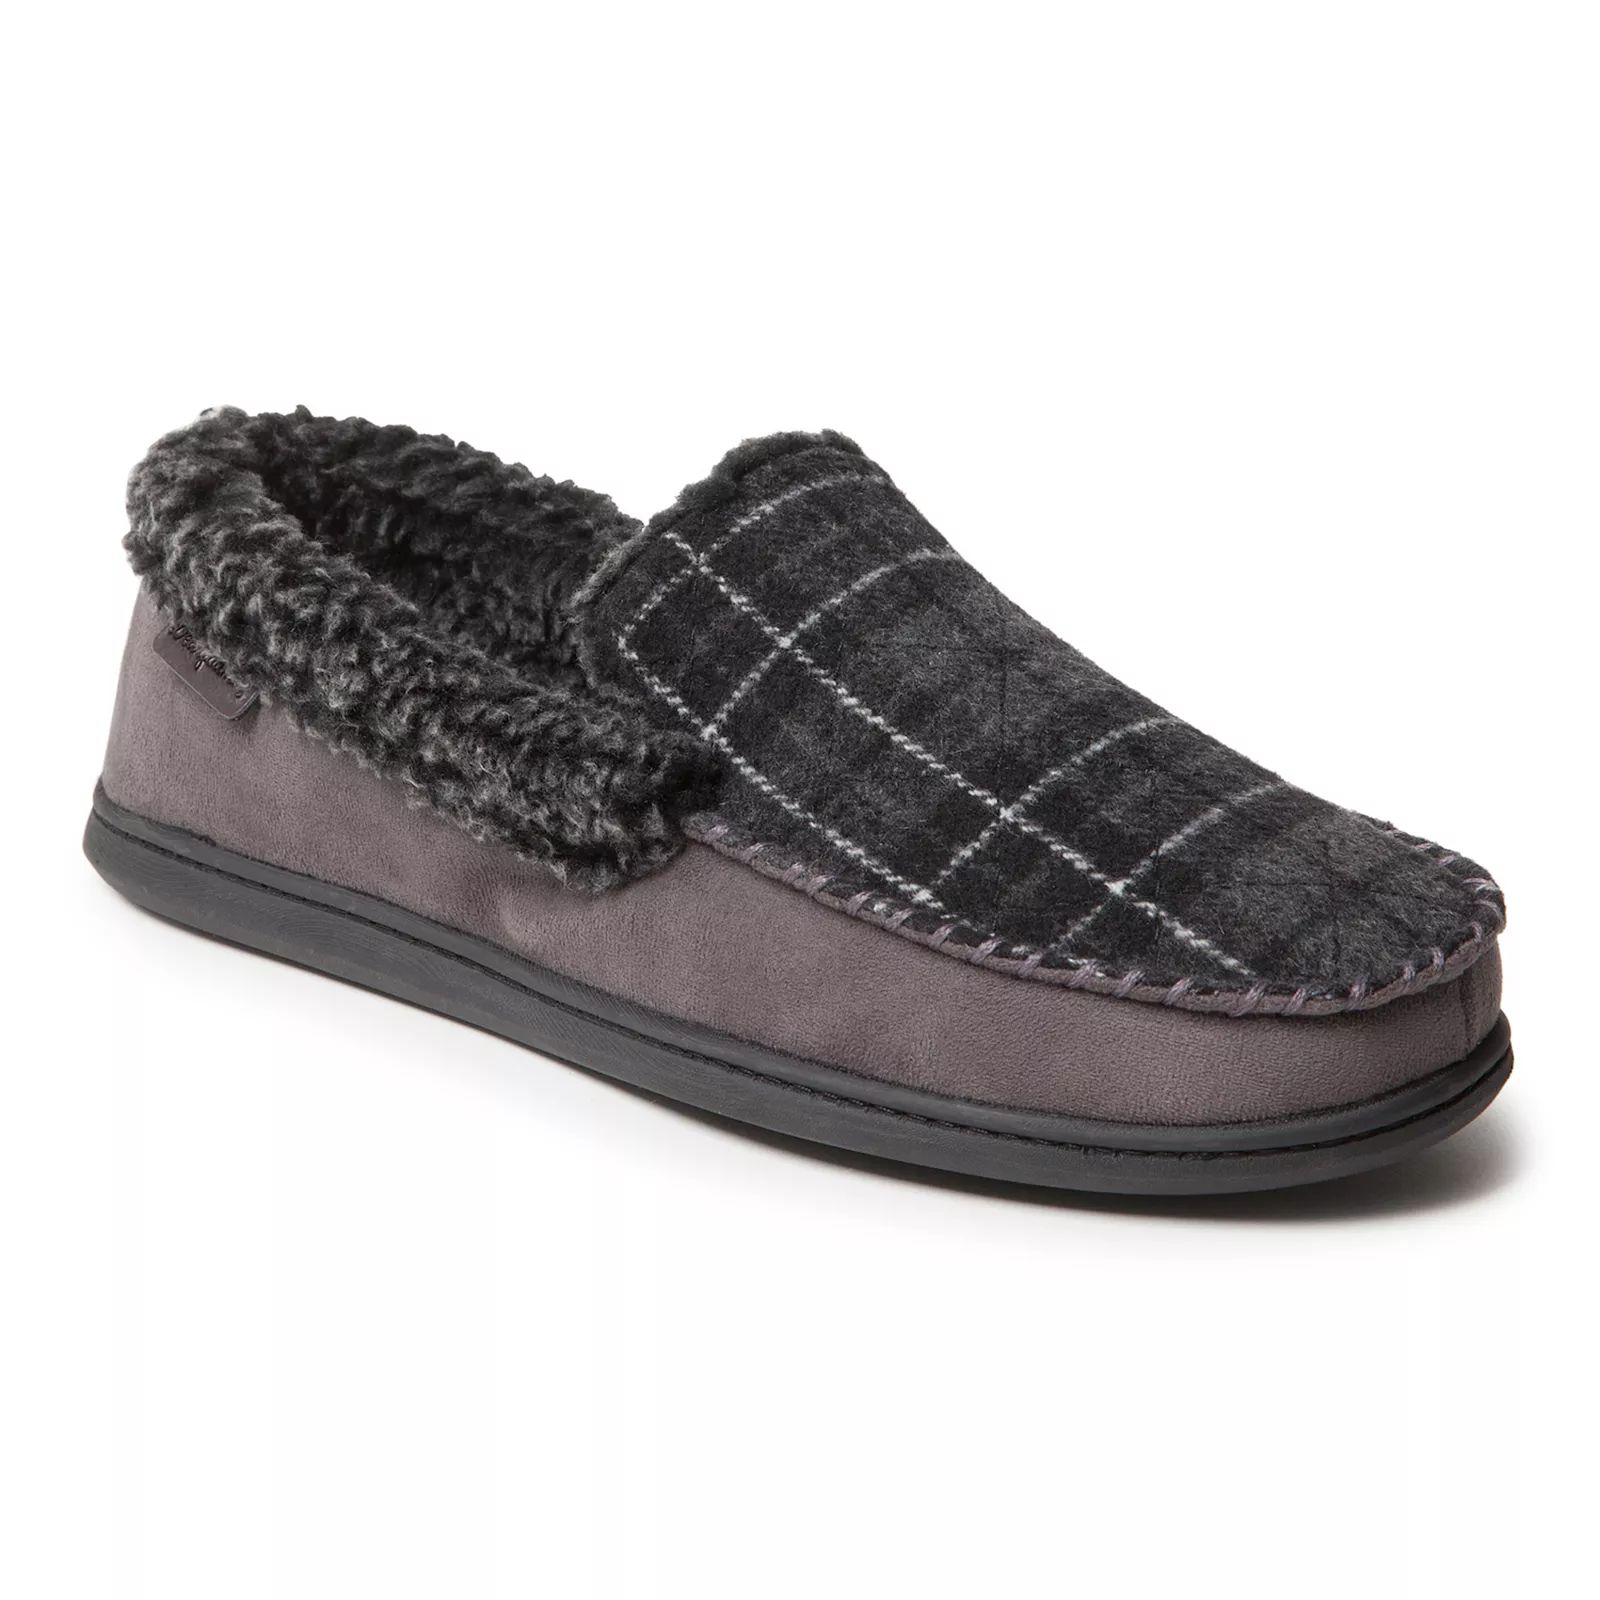 Men's Dearfoams Microfiber Suede Whipstitch Moccasin Slippers, Size: Small, Med Grey | Kohl's